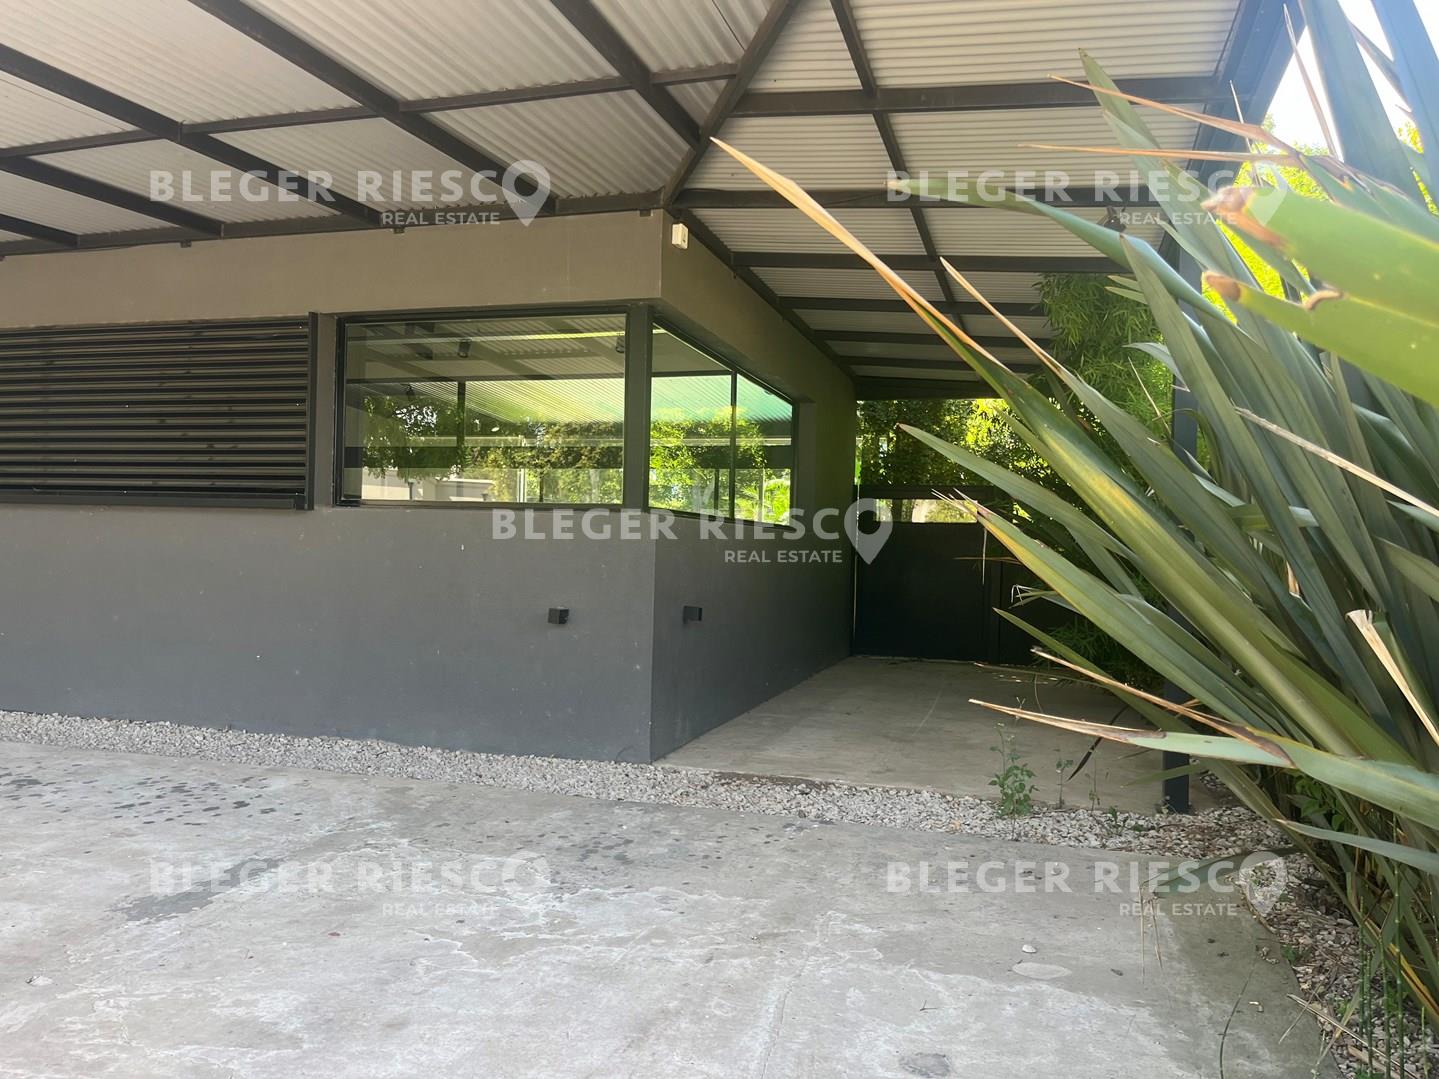 #4979235 | Sale | House | San Matias (Bleger-Riesco Real State)